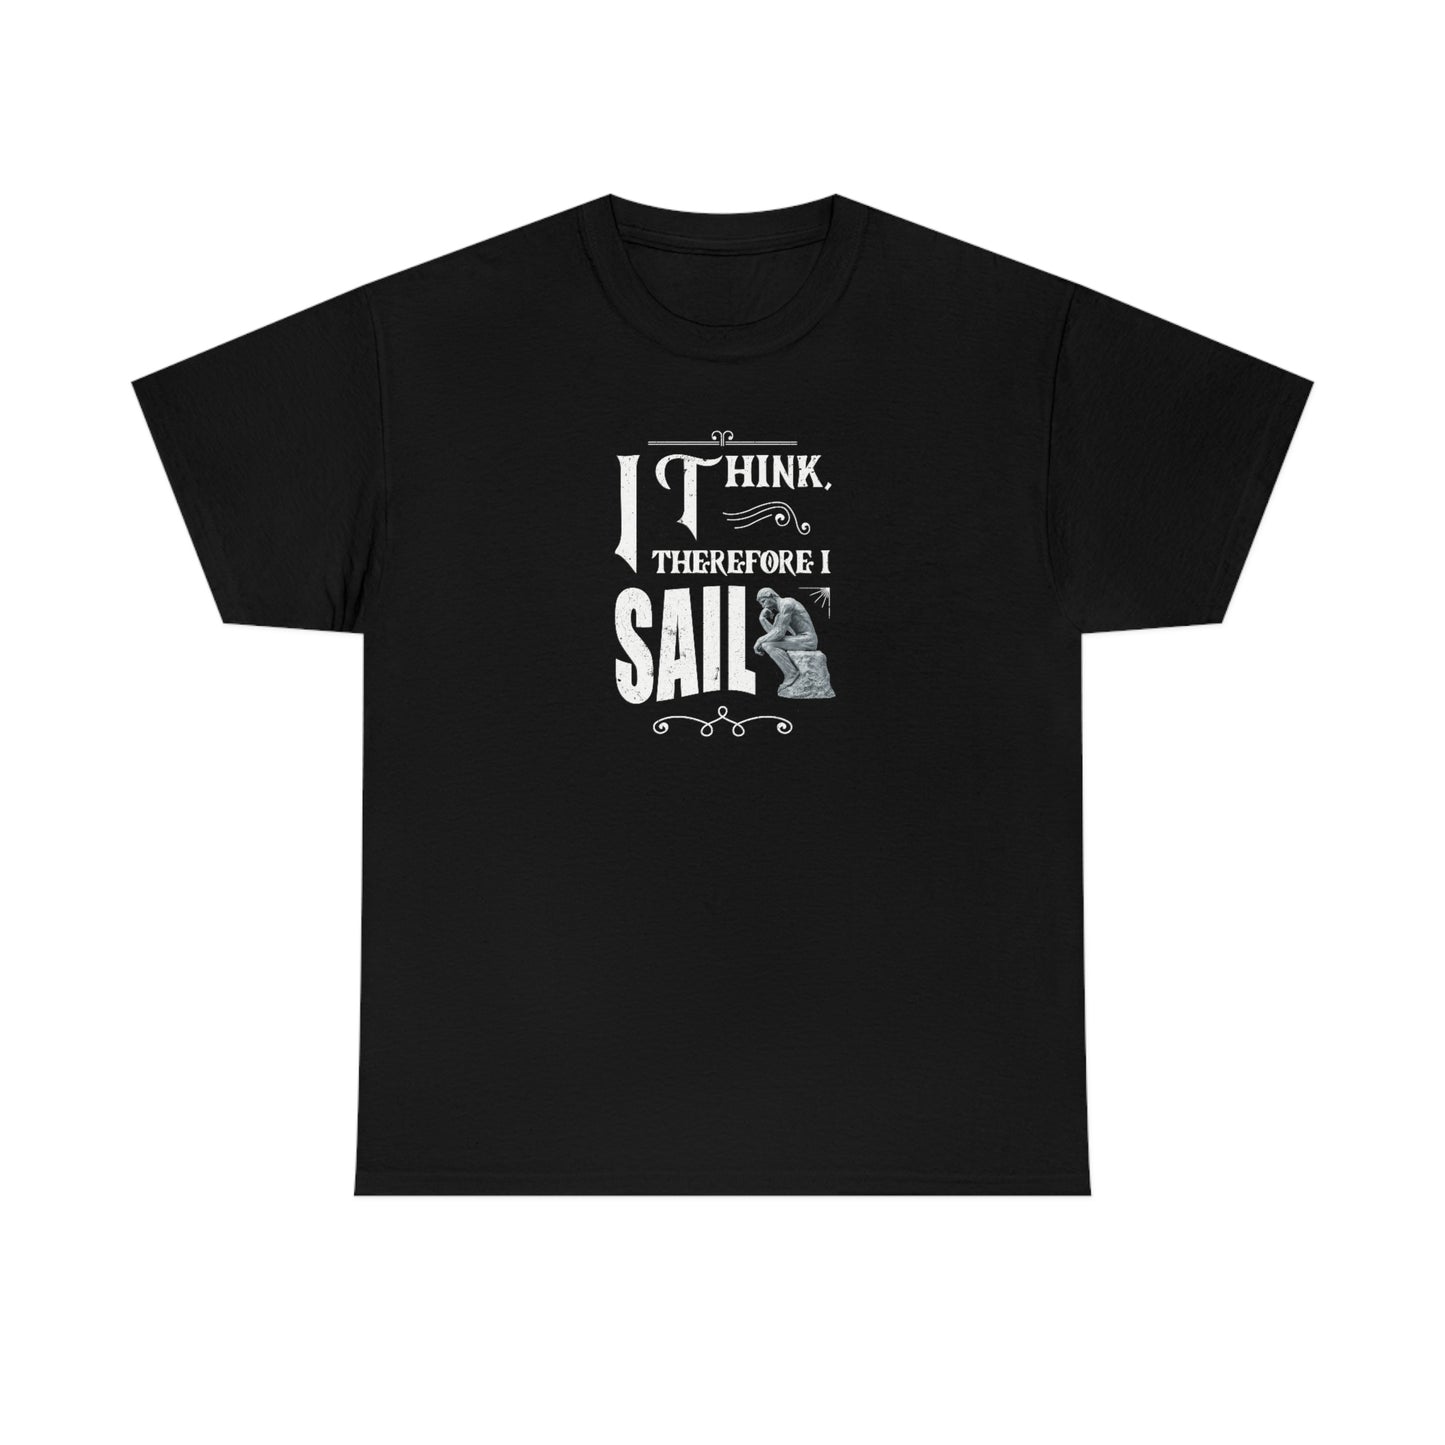 I Think, Therefore I sail